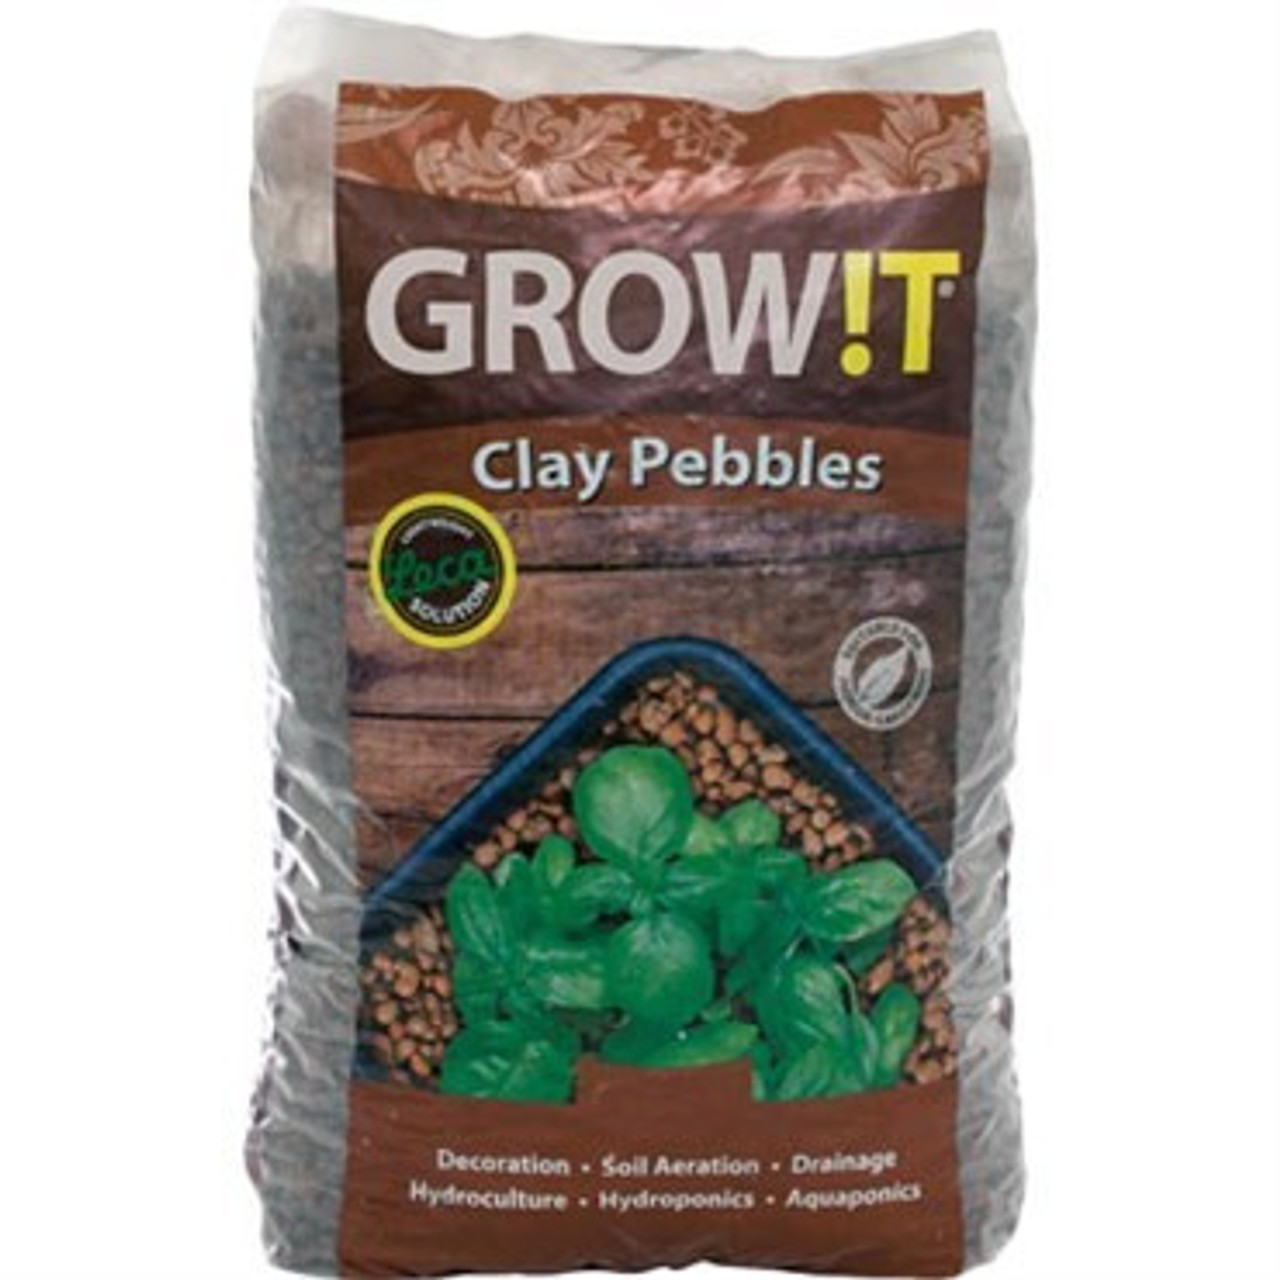 Zoo Med Excavator Clay Burrowing Substrate, 10 Lb 